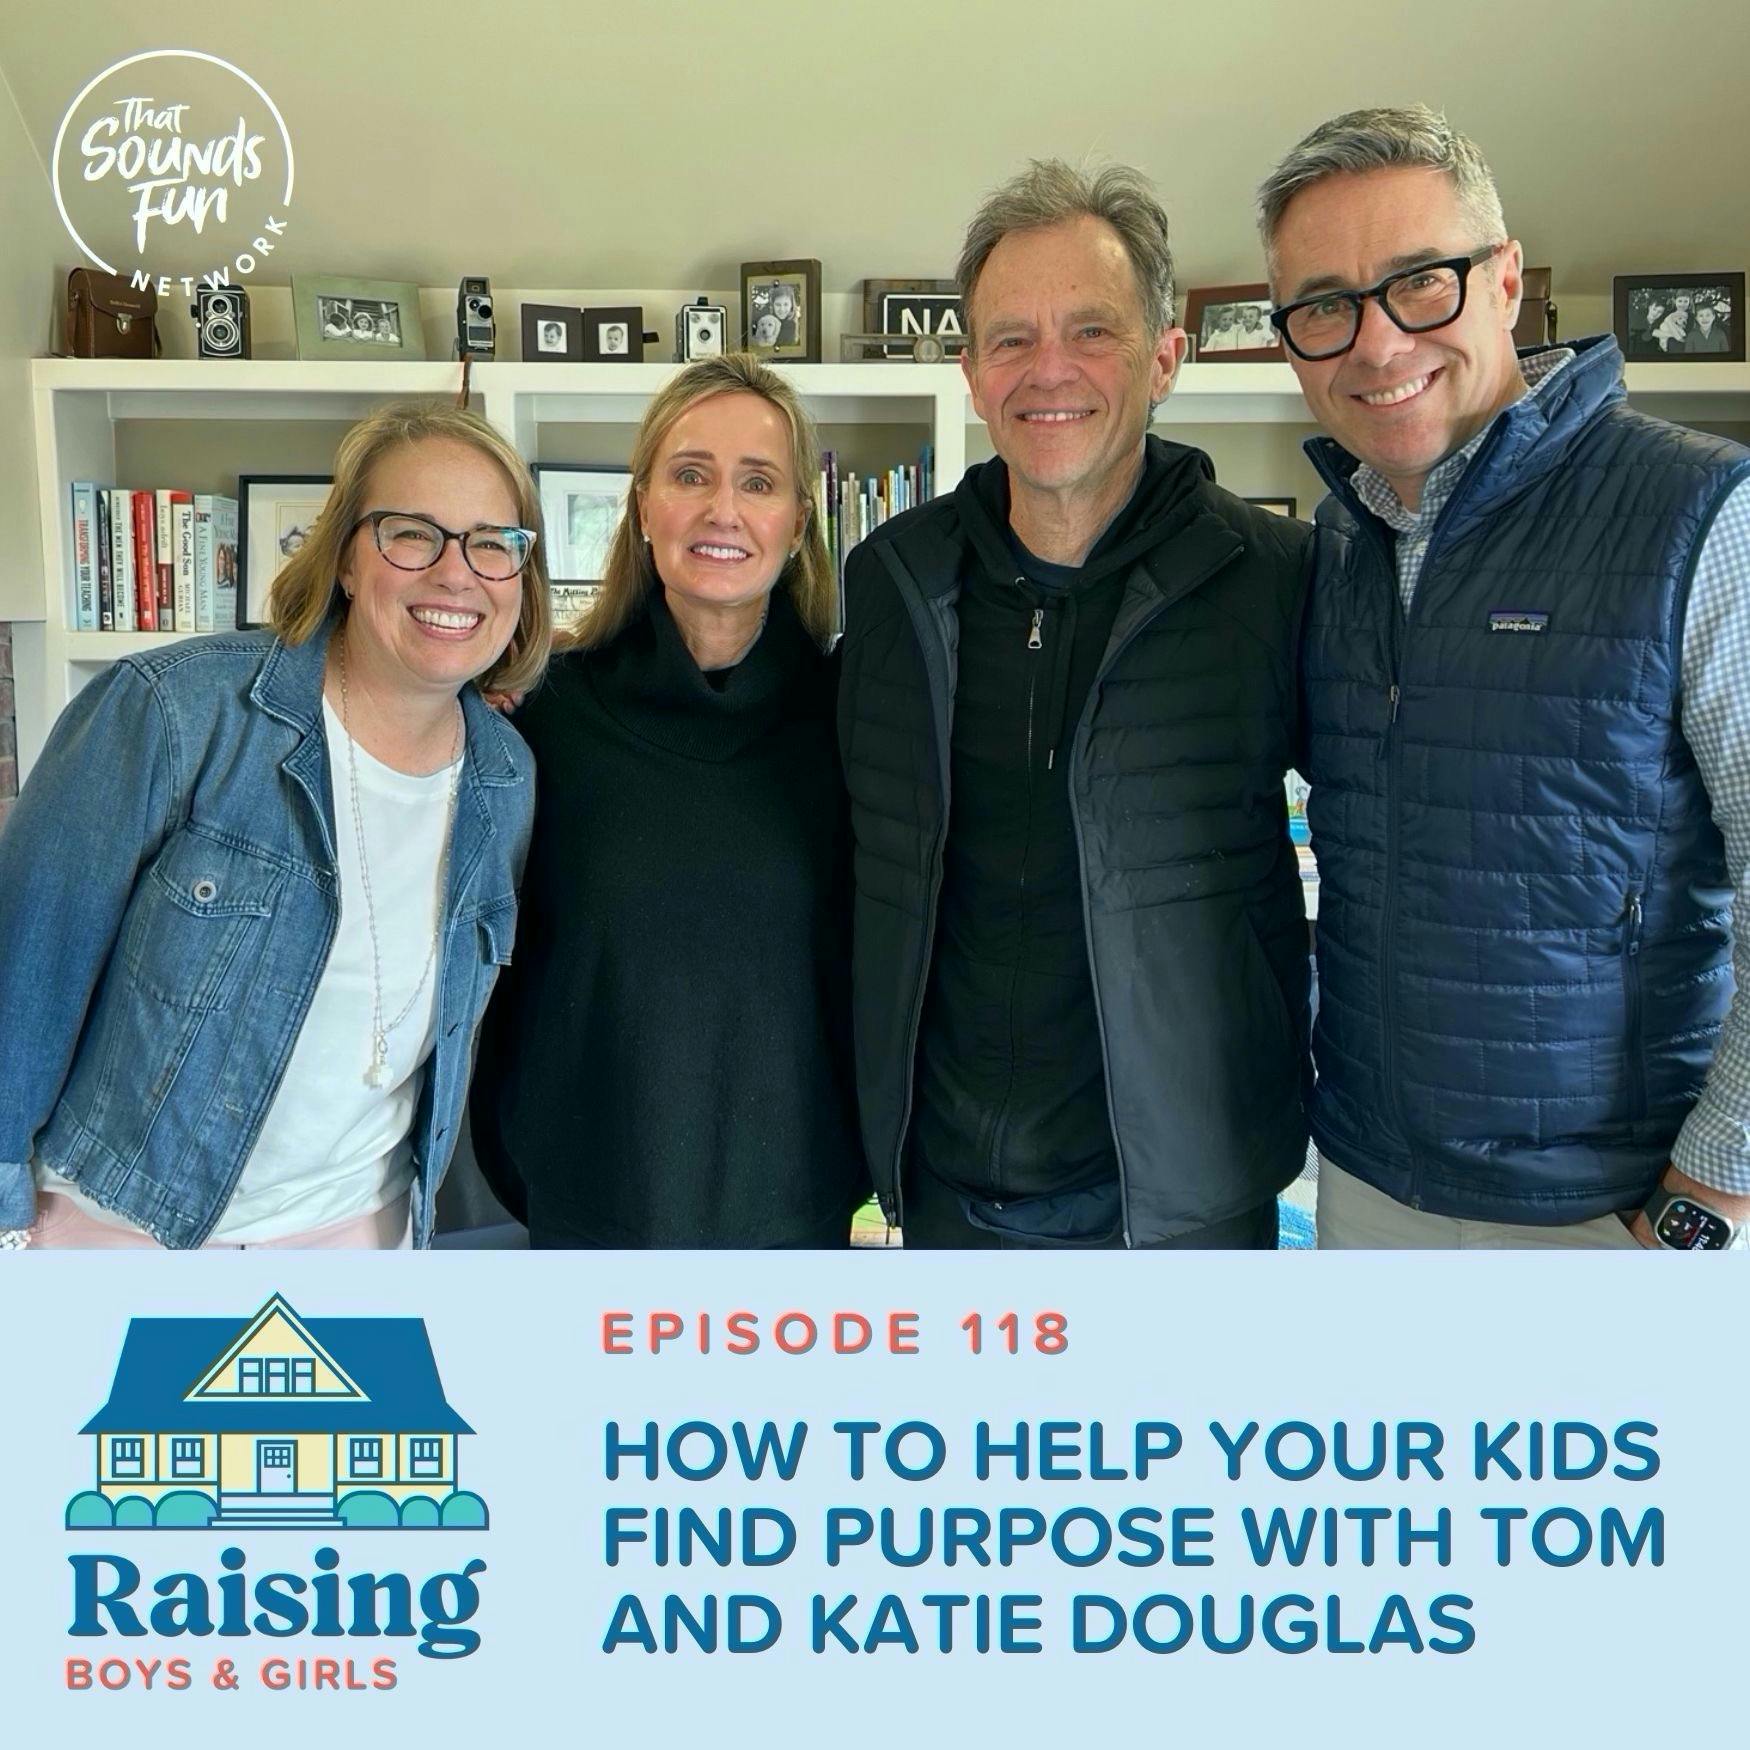 Episode 118: How to Help Your Kids Find Purpose with Tom and Katie Douglas